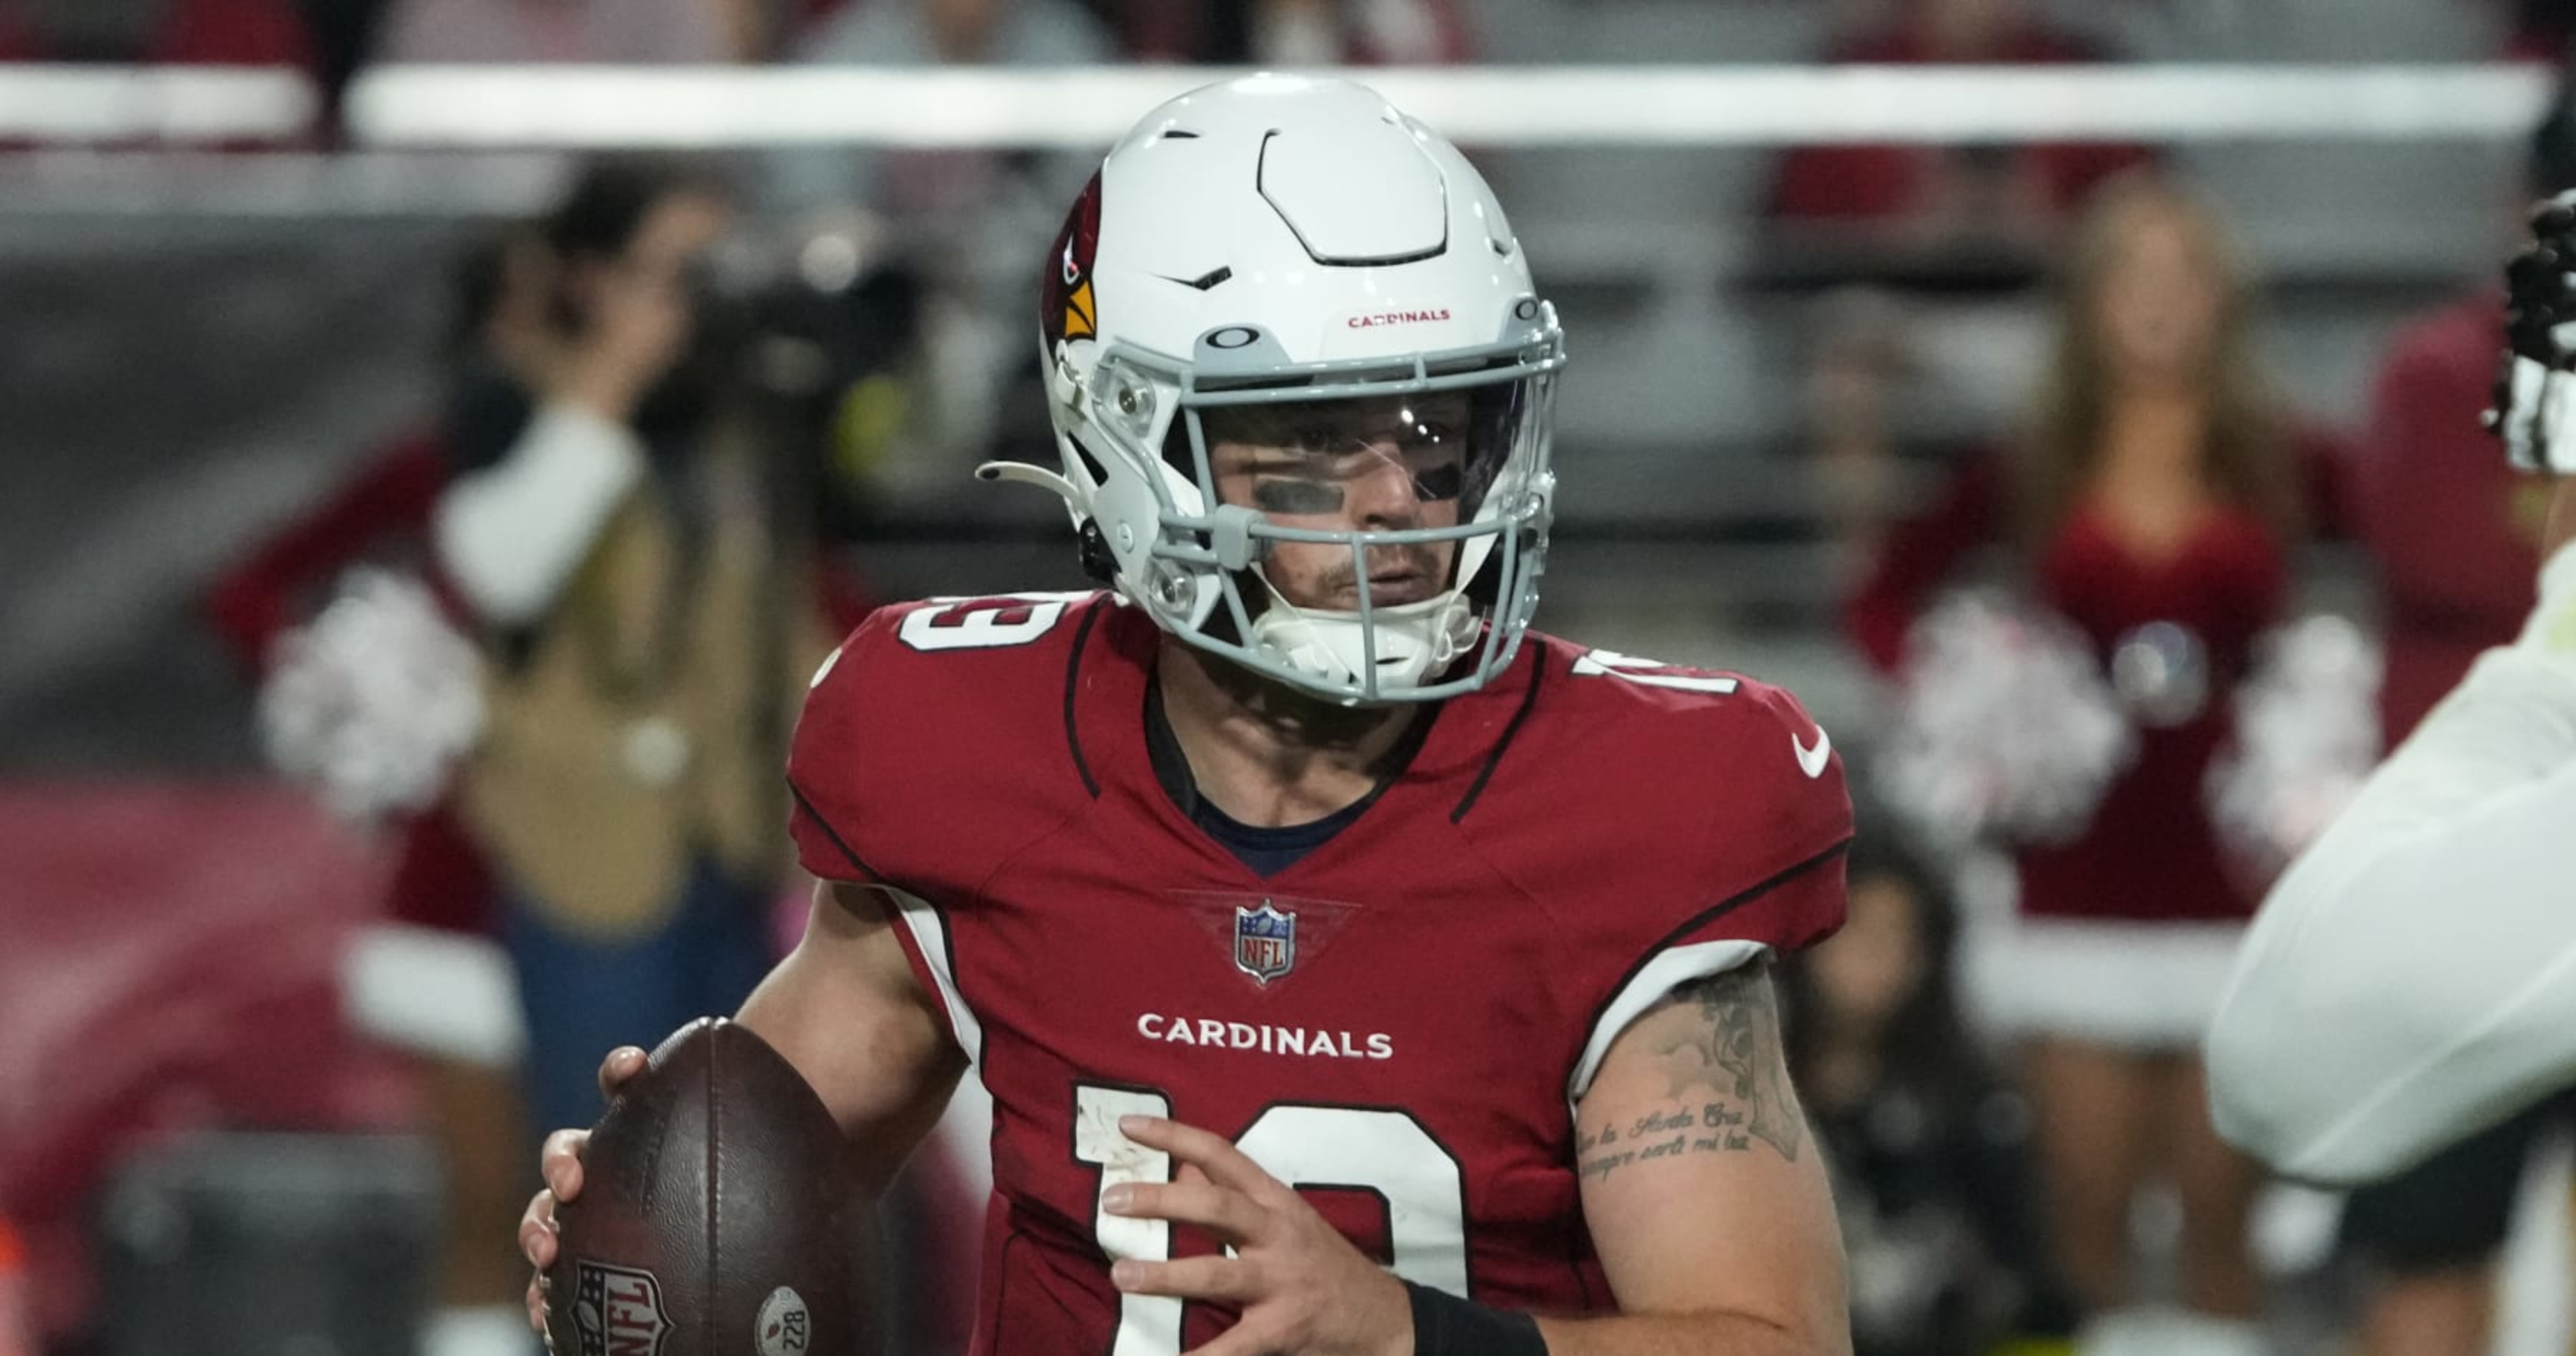 12Sports on 'Hard Knocks': Episode 2 featuring the Cardinals